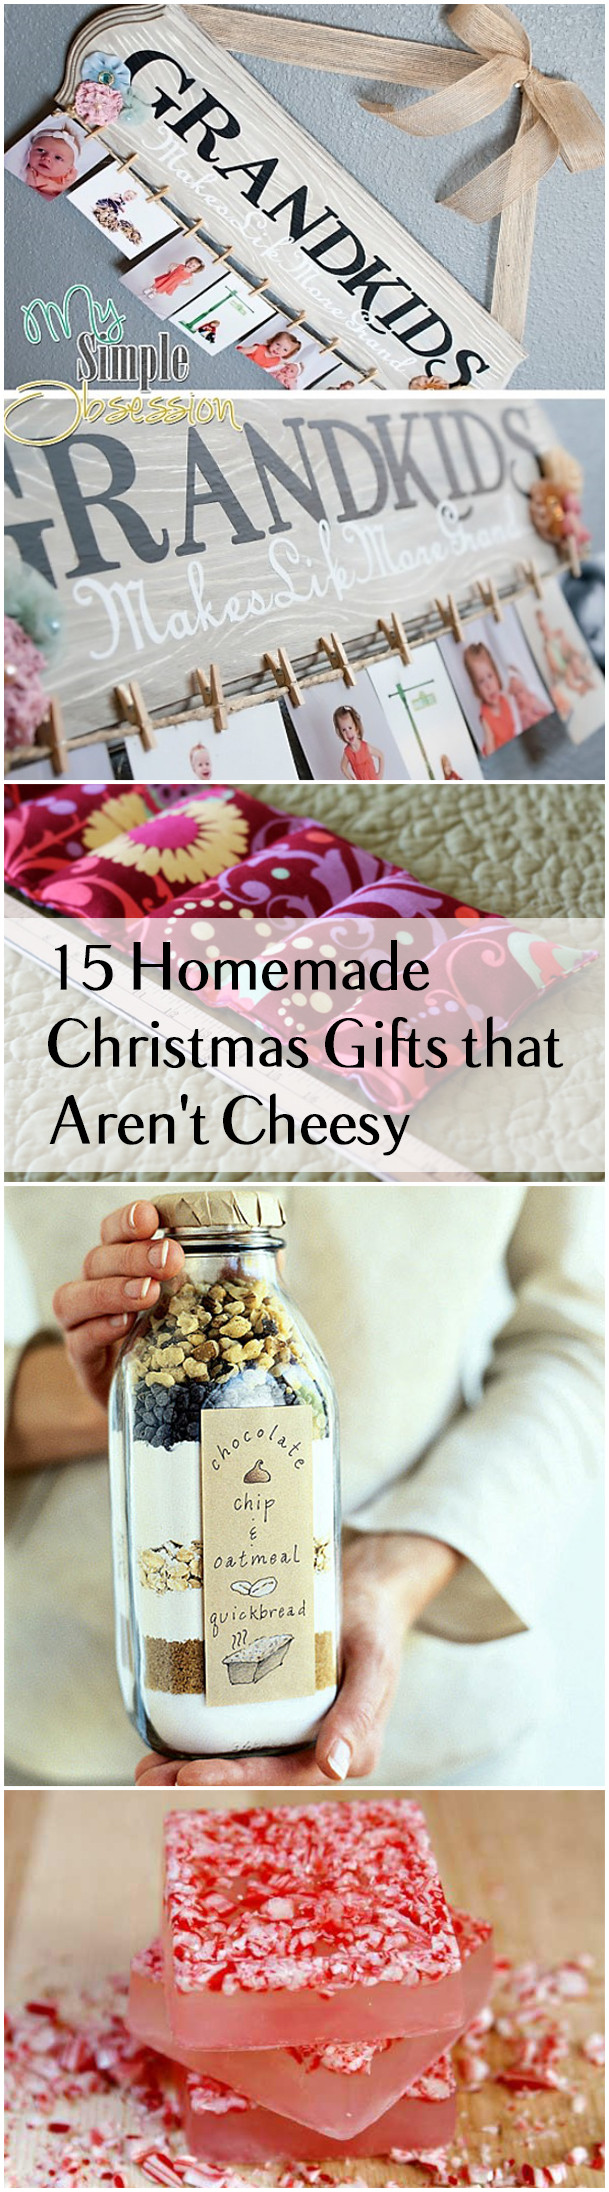 DIY Christmas Presents
 15 Homemade Christmas Gifts that Aren t Cheesy